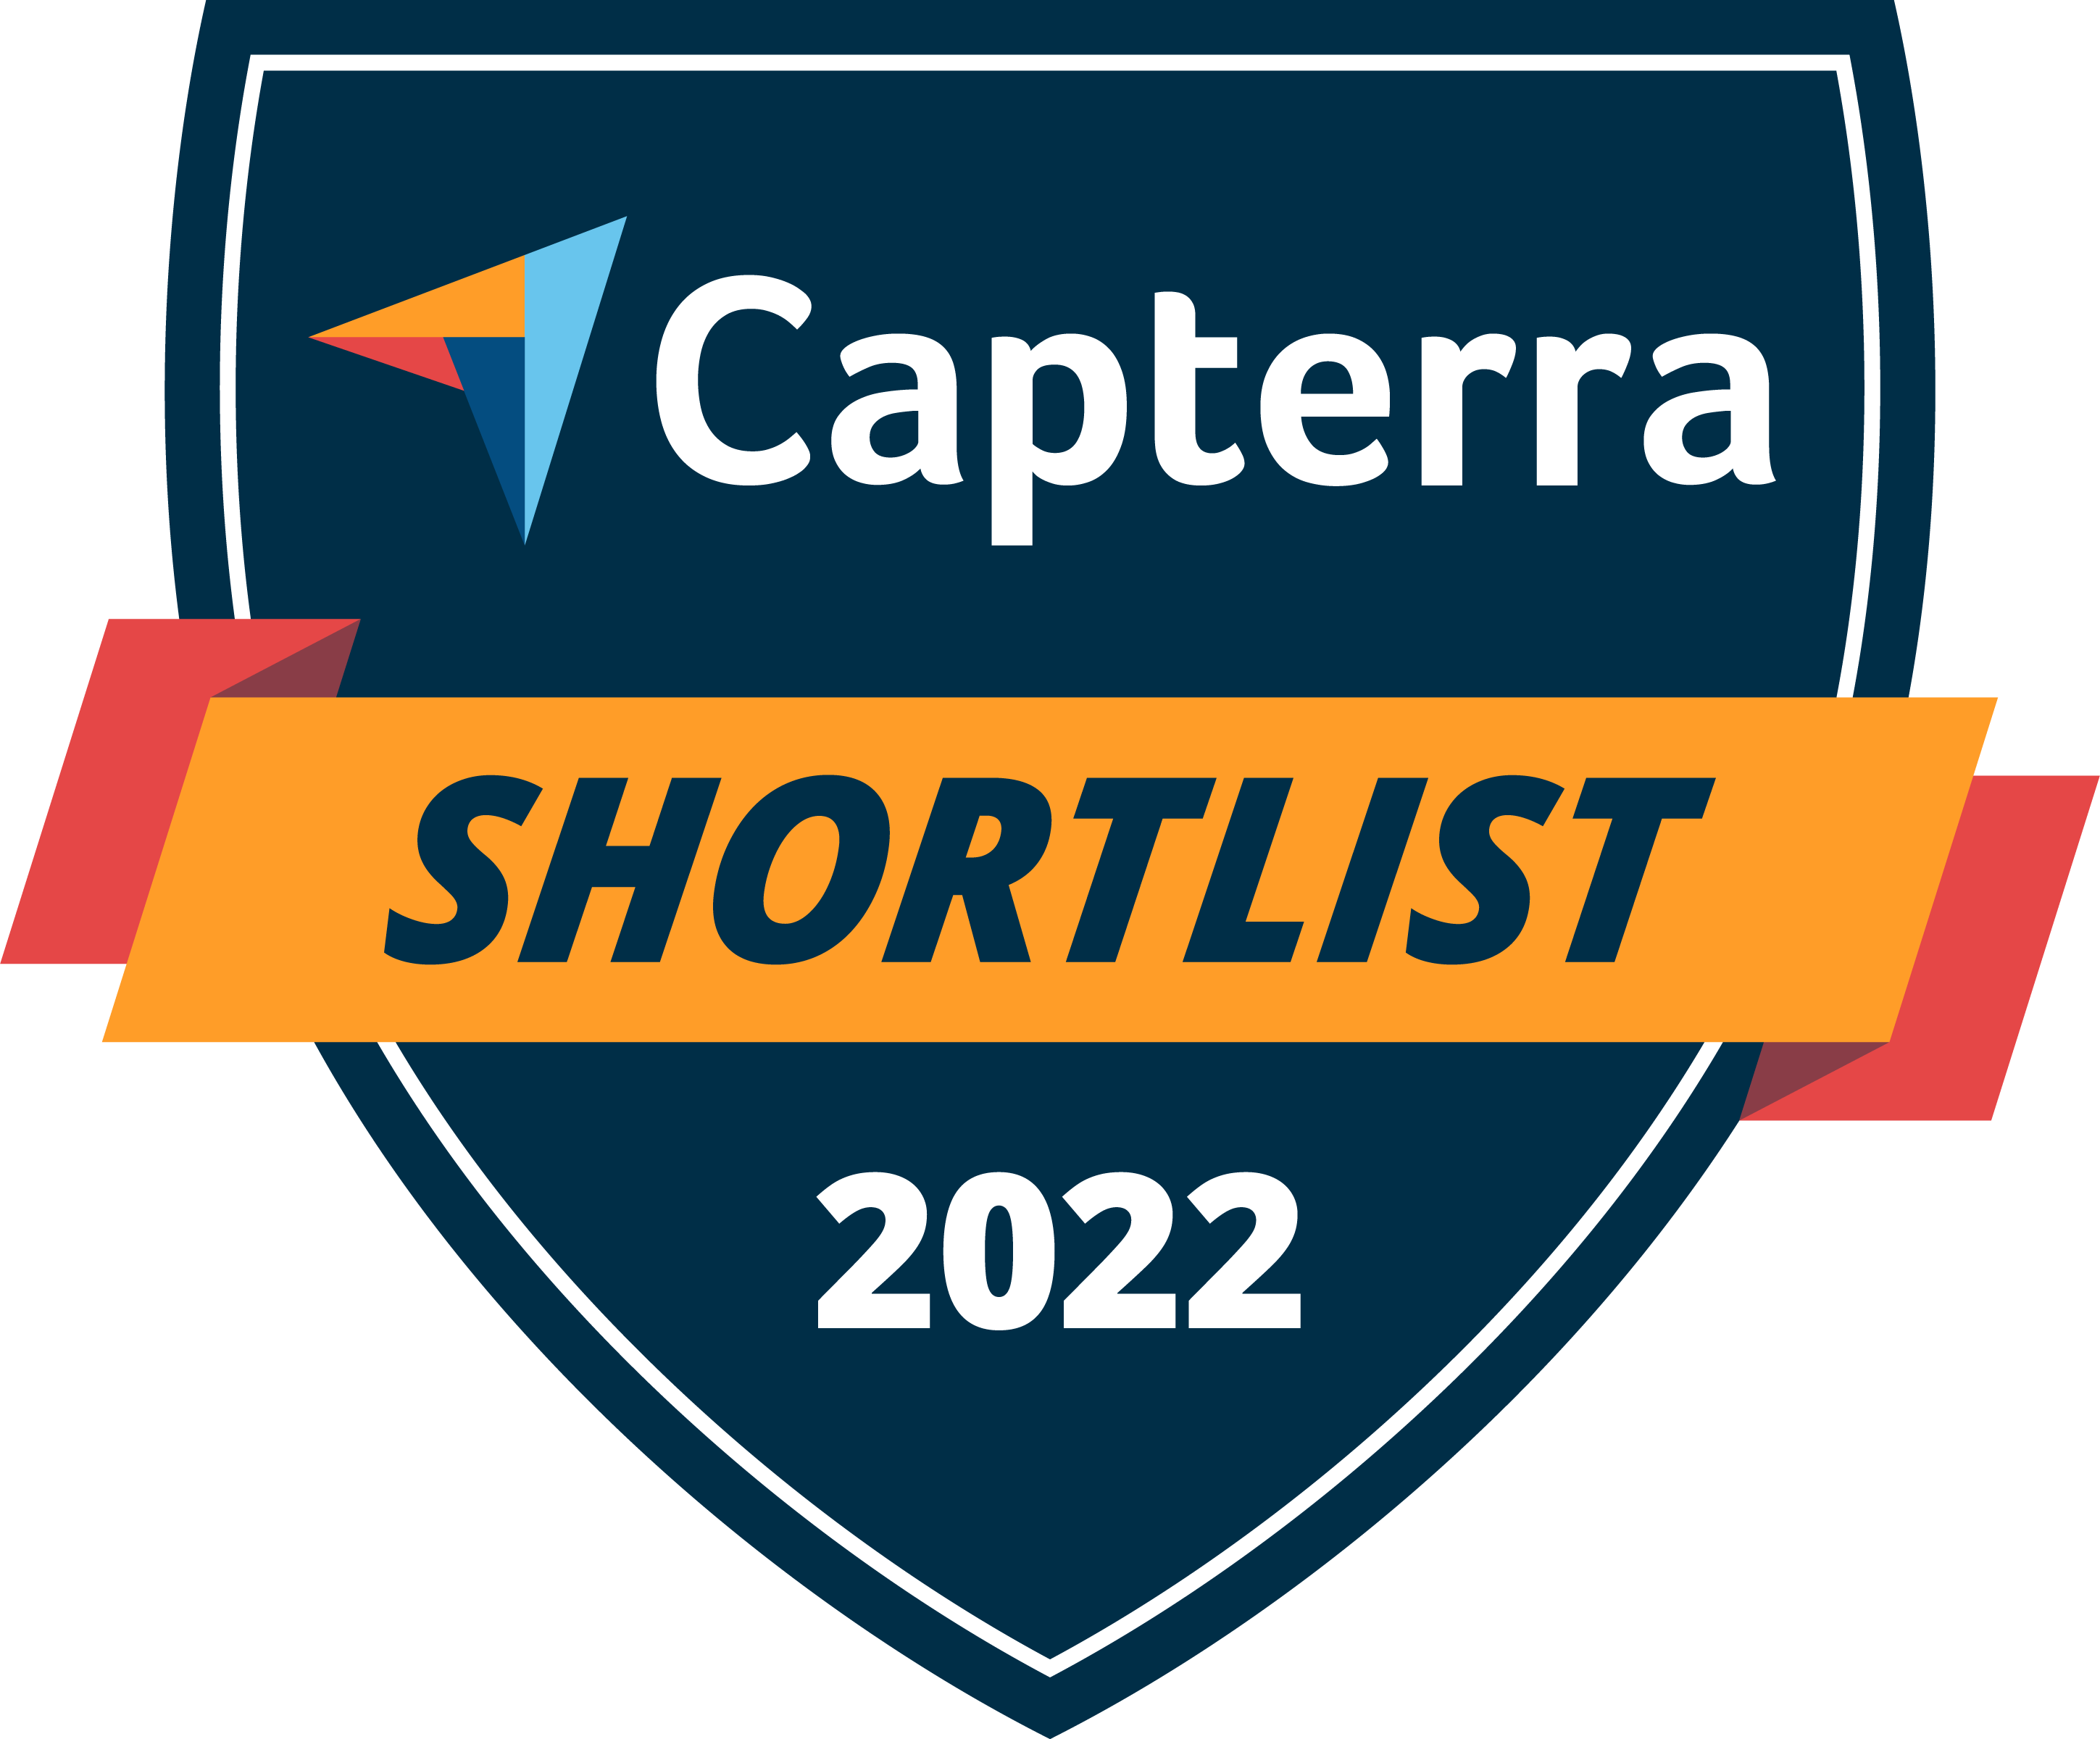 Image of the Capterra Shortlist for the Best Mental Health EHR in 2022, showcasing the top electronic health record systems recognized for their excellence in serving the mental health industry